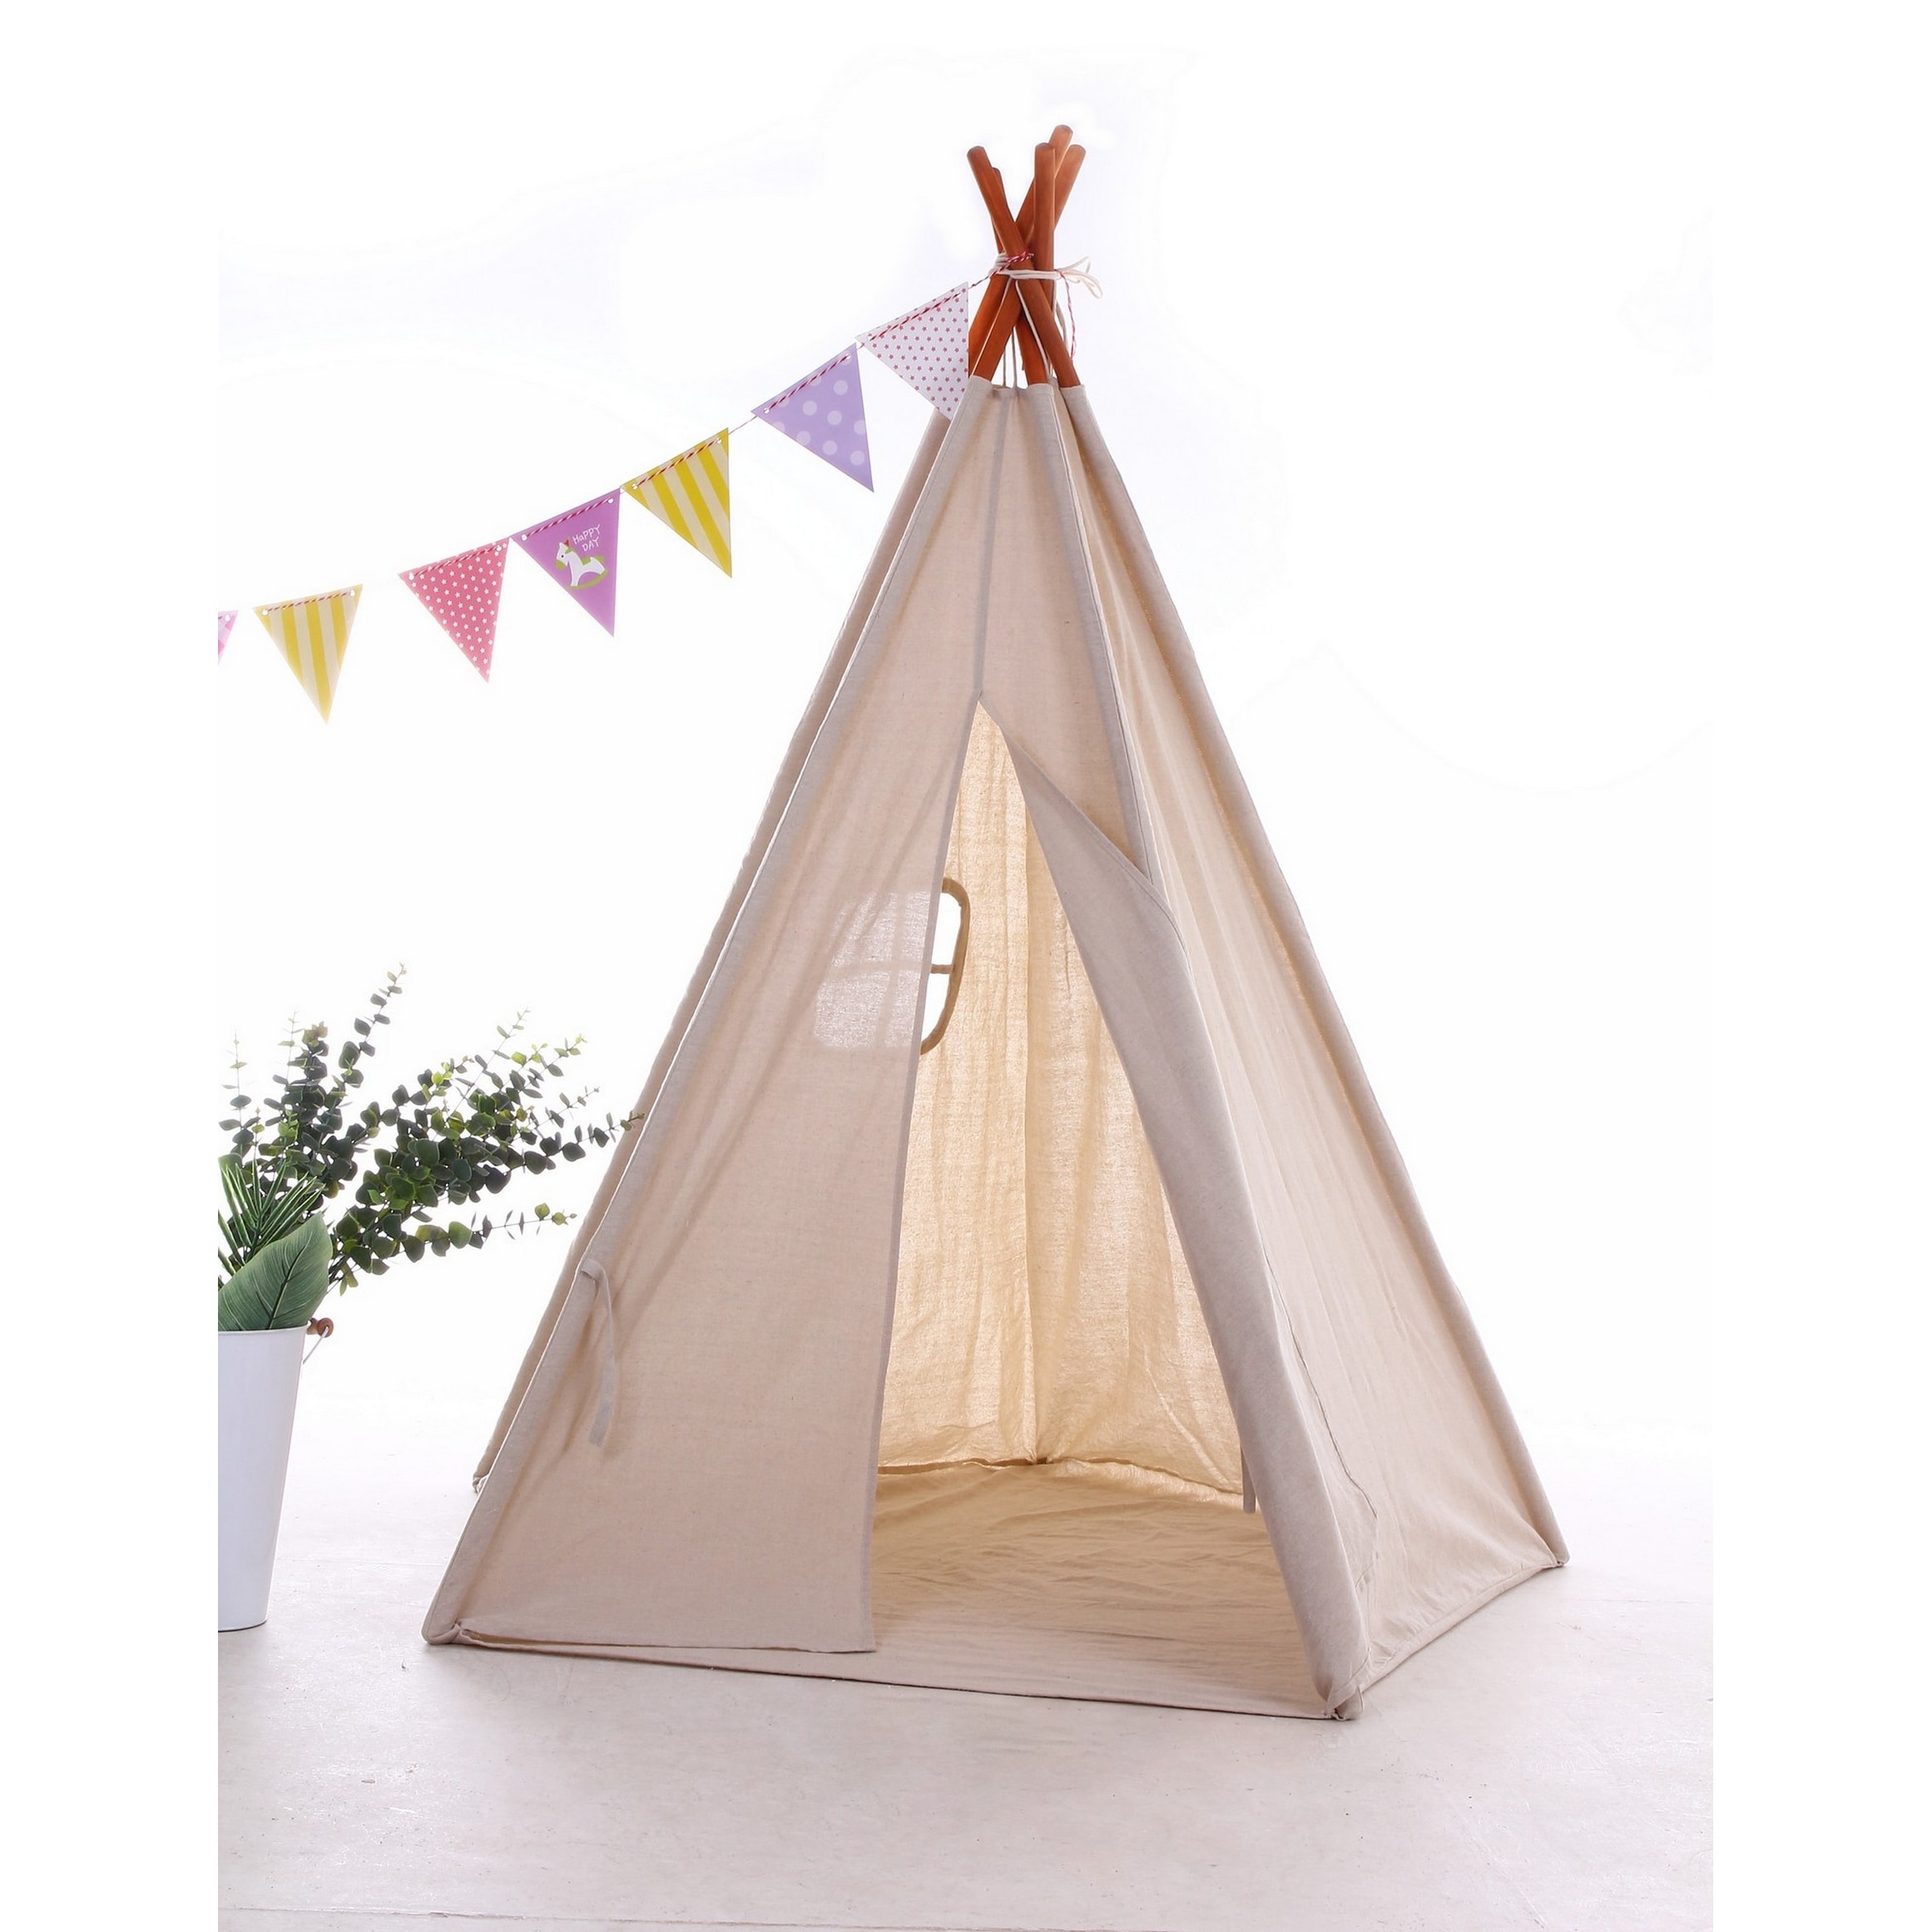 Portable Kids Playhouse for Indoor Outdoor Bottom Blue Printed Canvas Teepee for Girl Boy with Carry Bag XWT Kids Teepee Tent with Mat